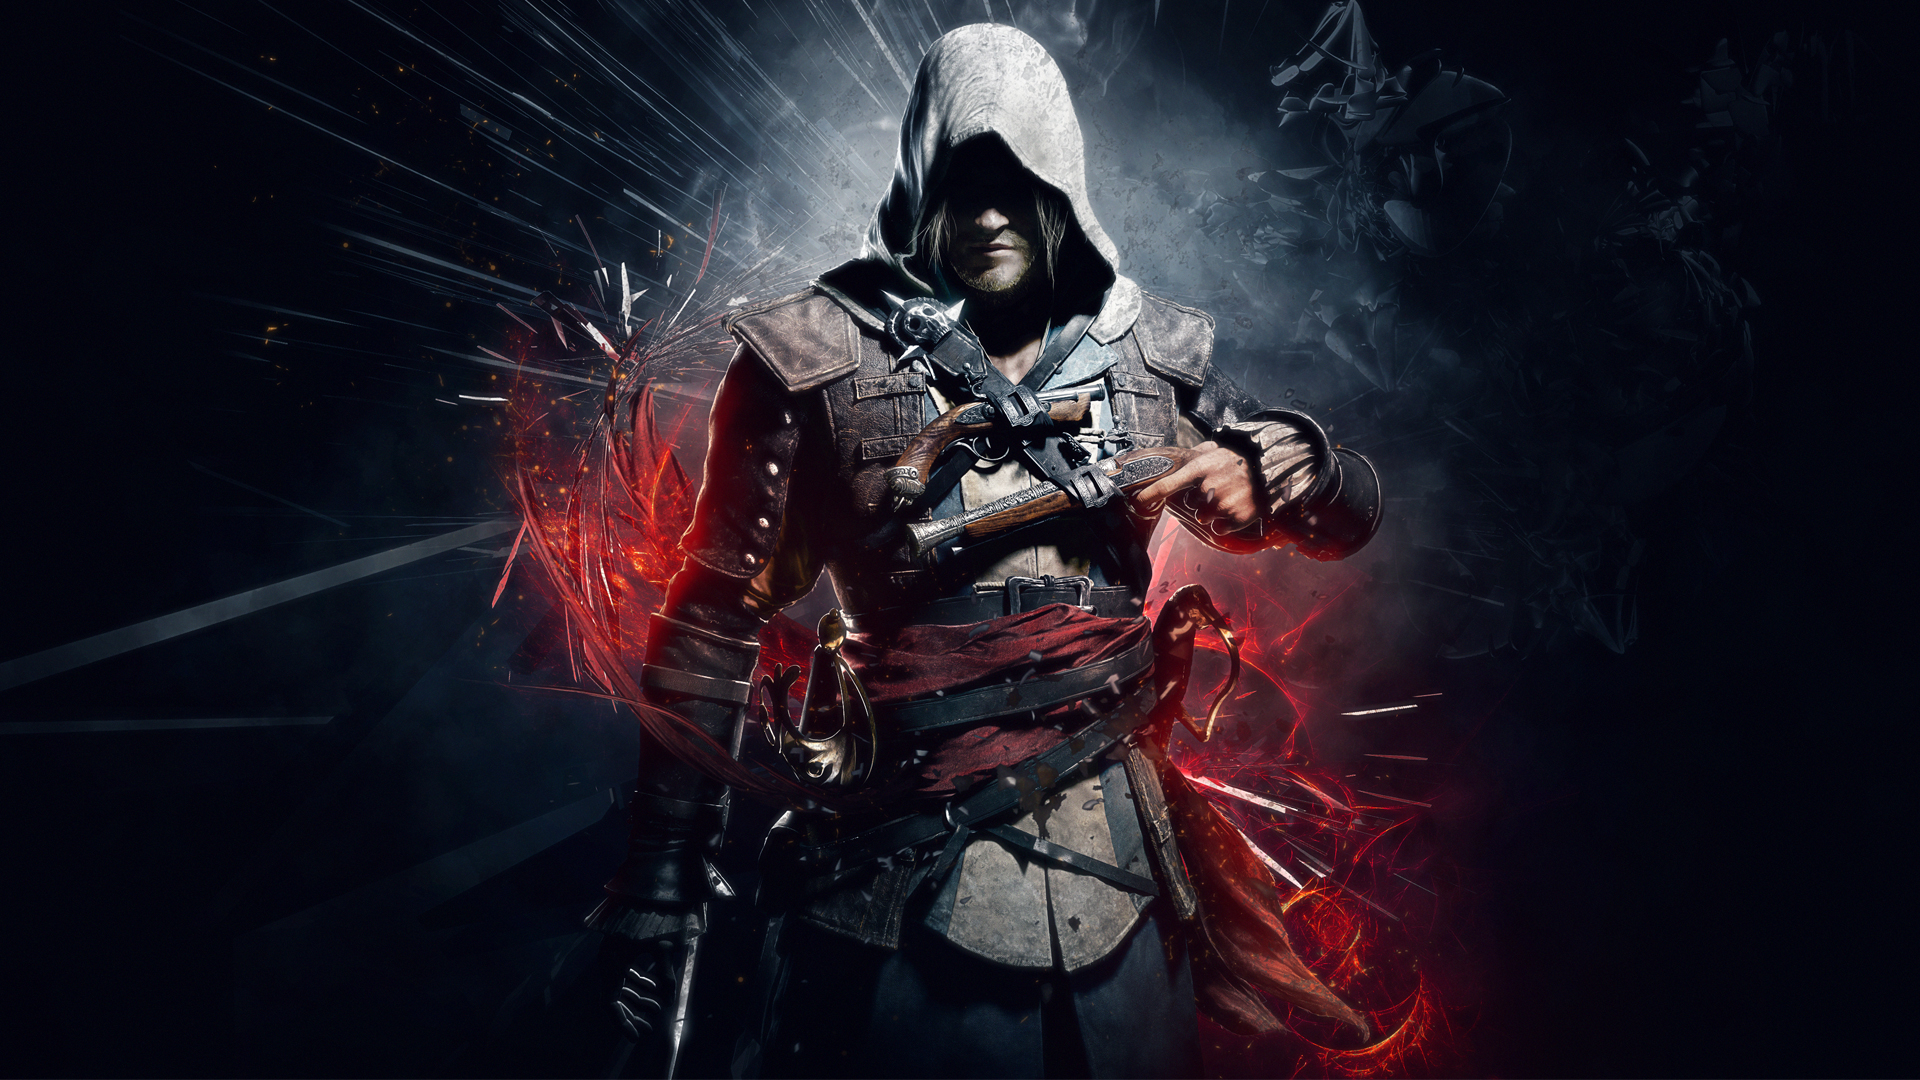 Edward Kenway - The Assassin's